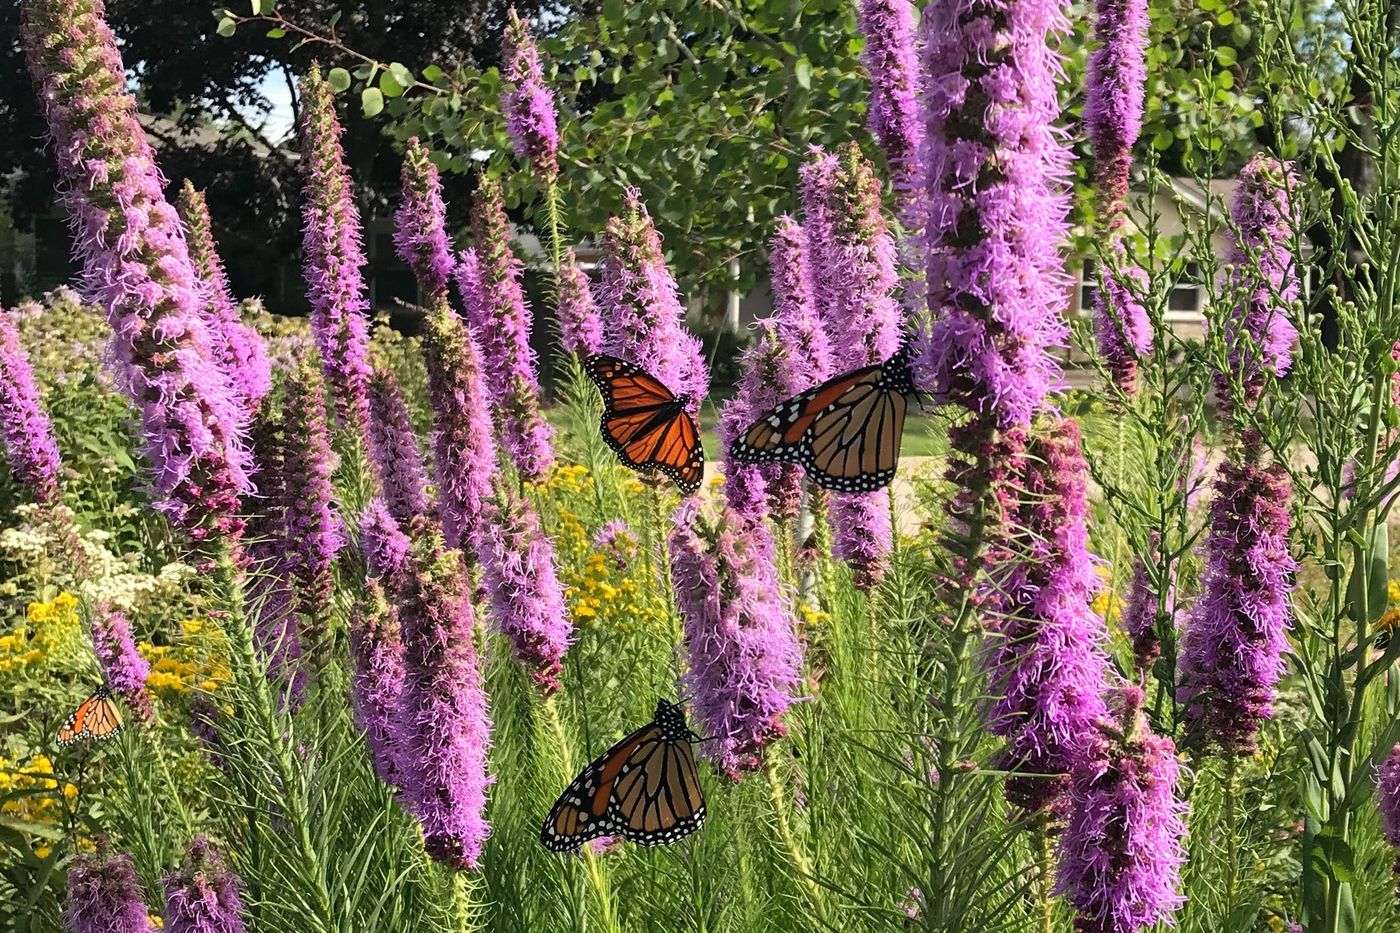 In addition to needing milkweed early in life, monarch butterflies rely on other native plants like blazing star for nectar. This gives them the energy to continue their migration.